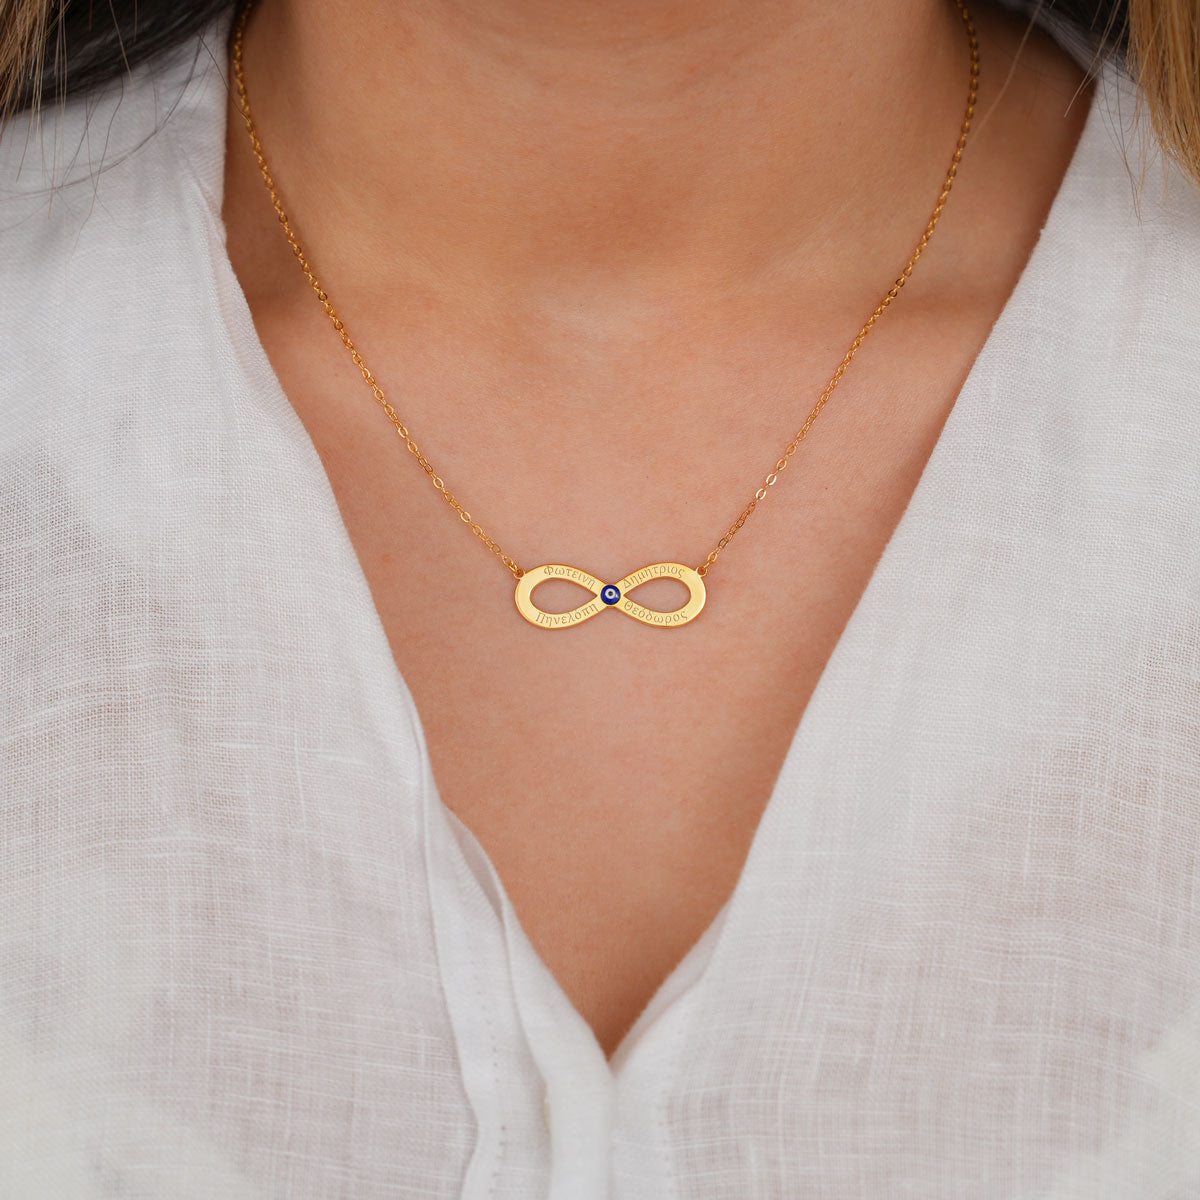 3 Greek Name Engraved Infinity Necklace With Evil Eye